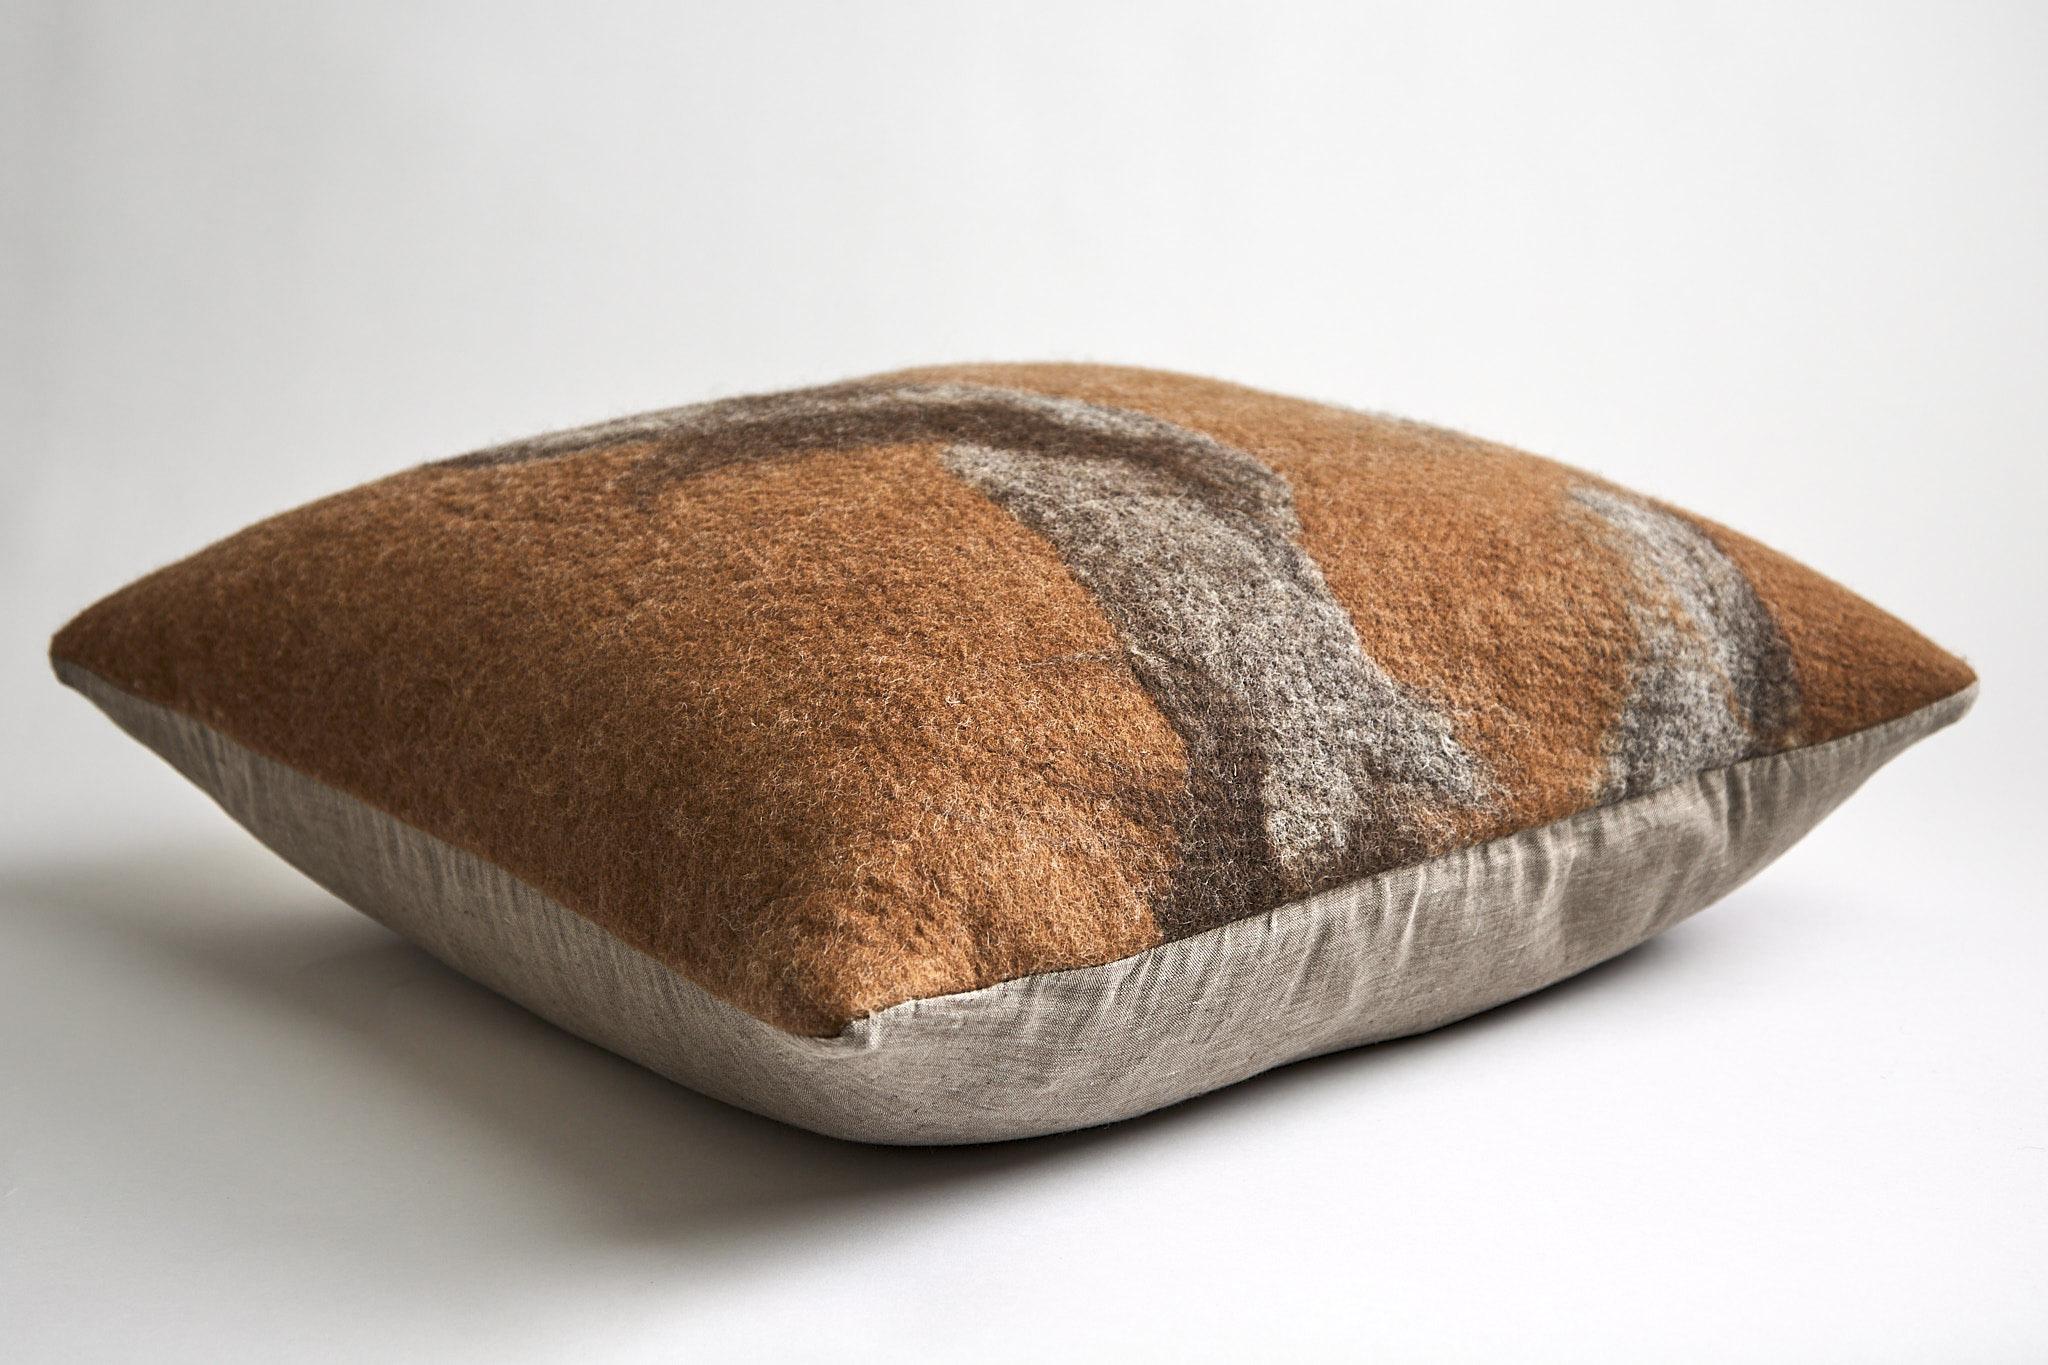 A gorgeous statement pillow hand painted in felted rust-colored Perendale glazed with Shetland gray wool. Milled in Sonoma, California, each is one-of-a-kind, no two are alike. With wool as the canvas, these artful pillows inspired by the